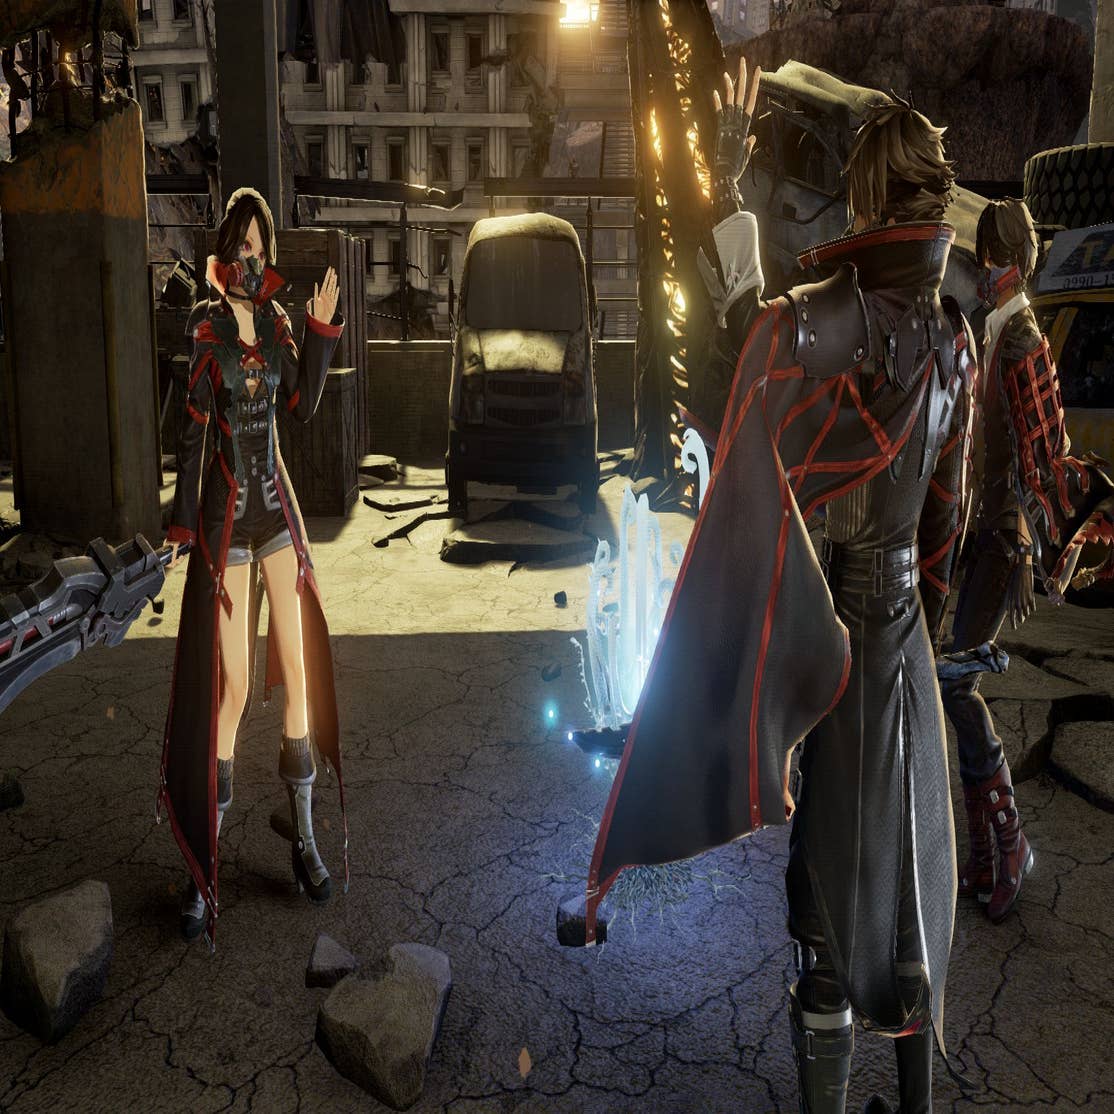 Play the New and Improved Code Vein Demo Today on Xbox One - Xbox Wire